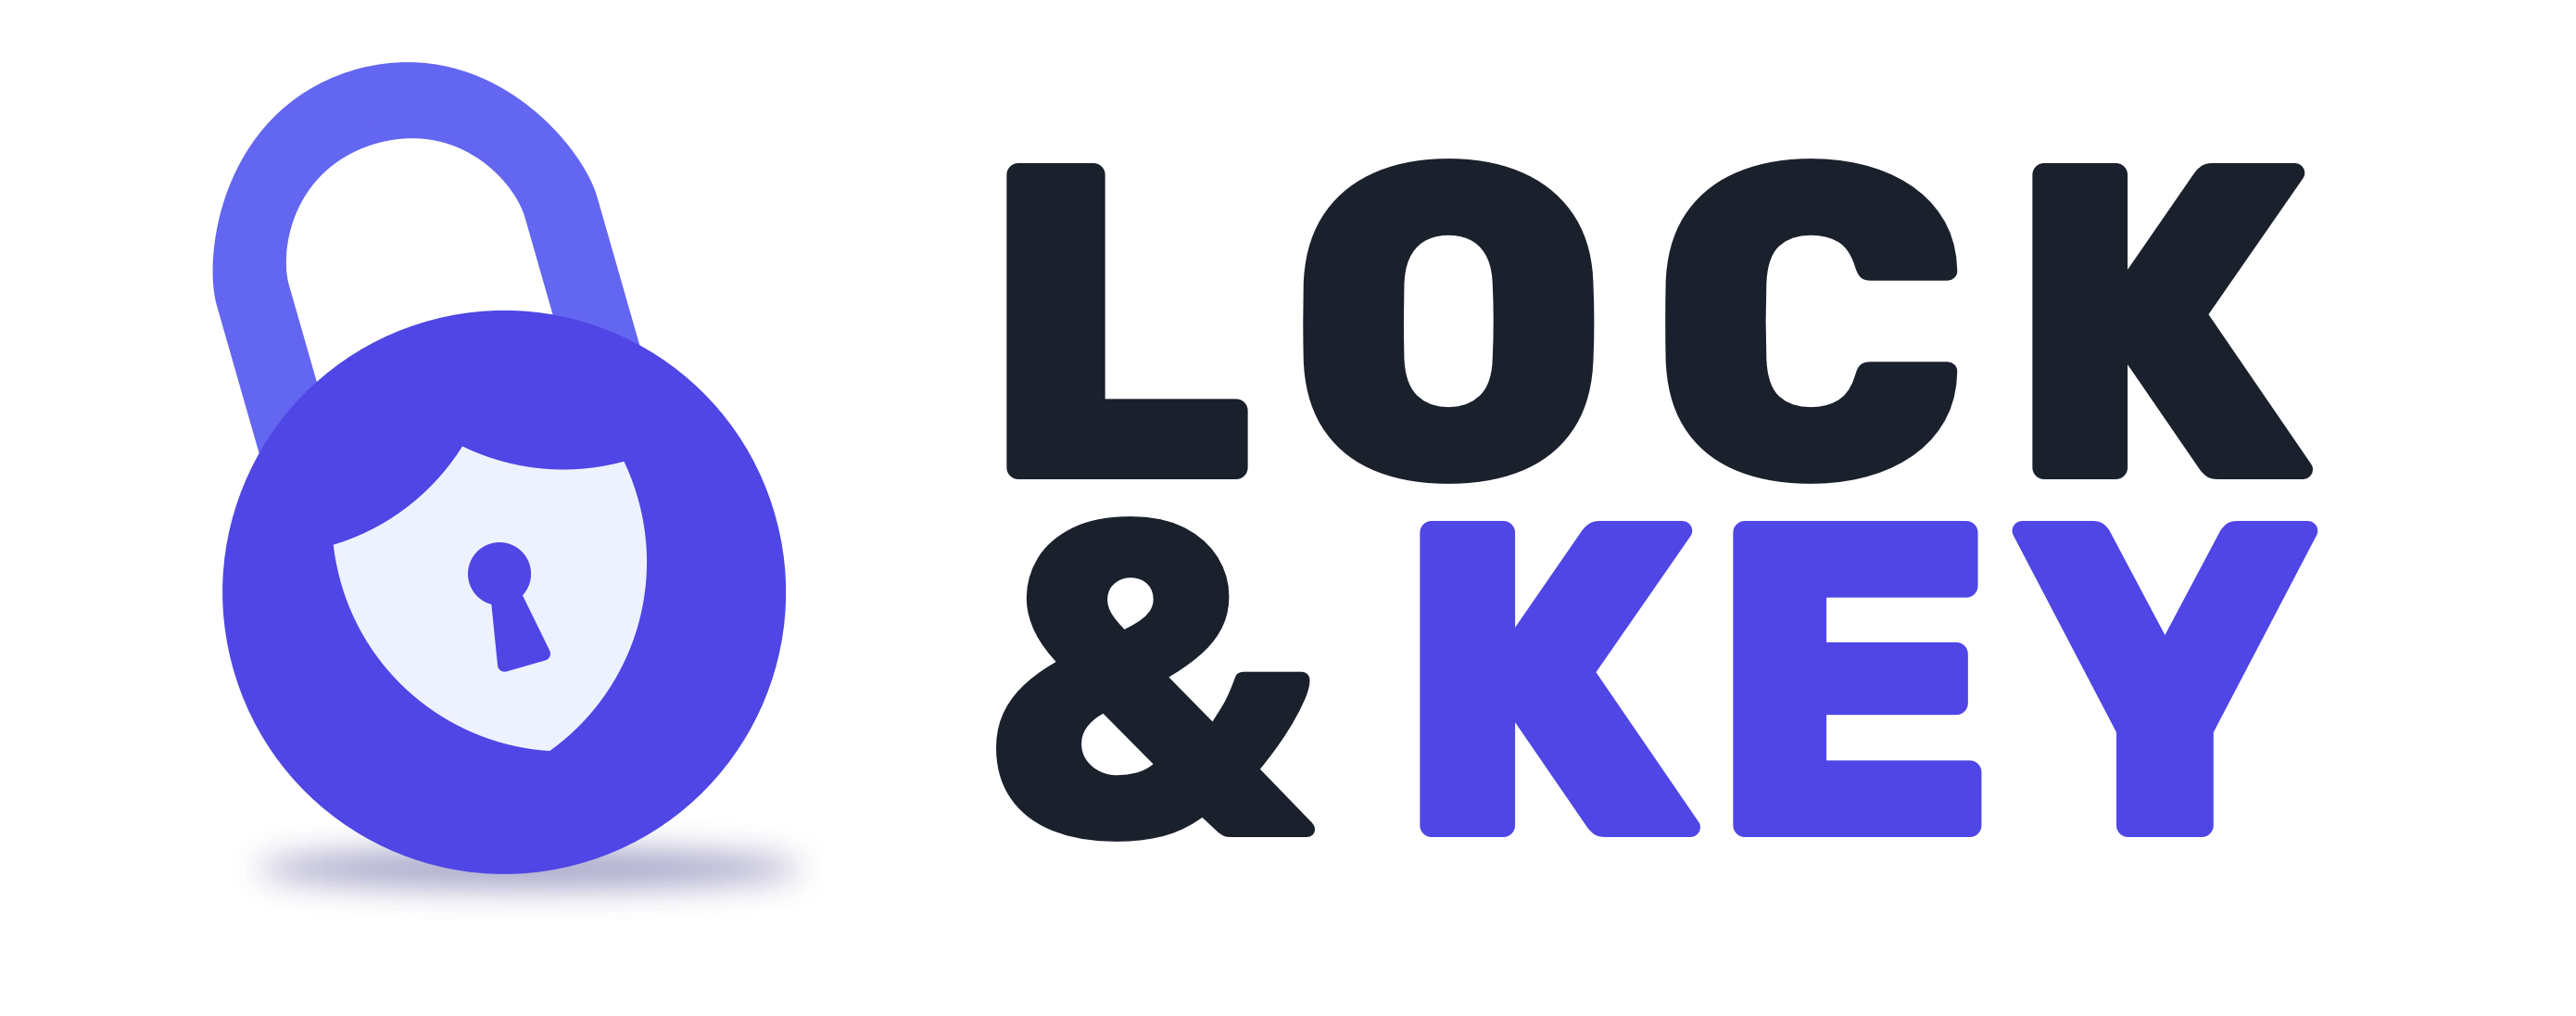 Lock & Key - The Securely Newsletter